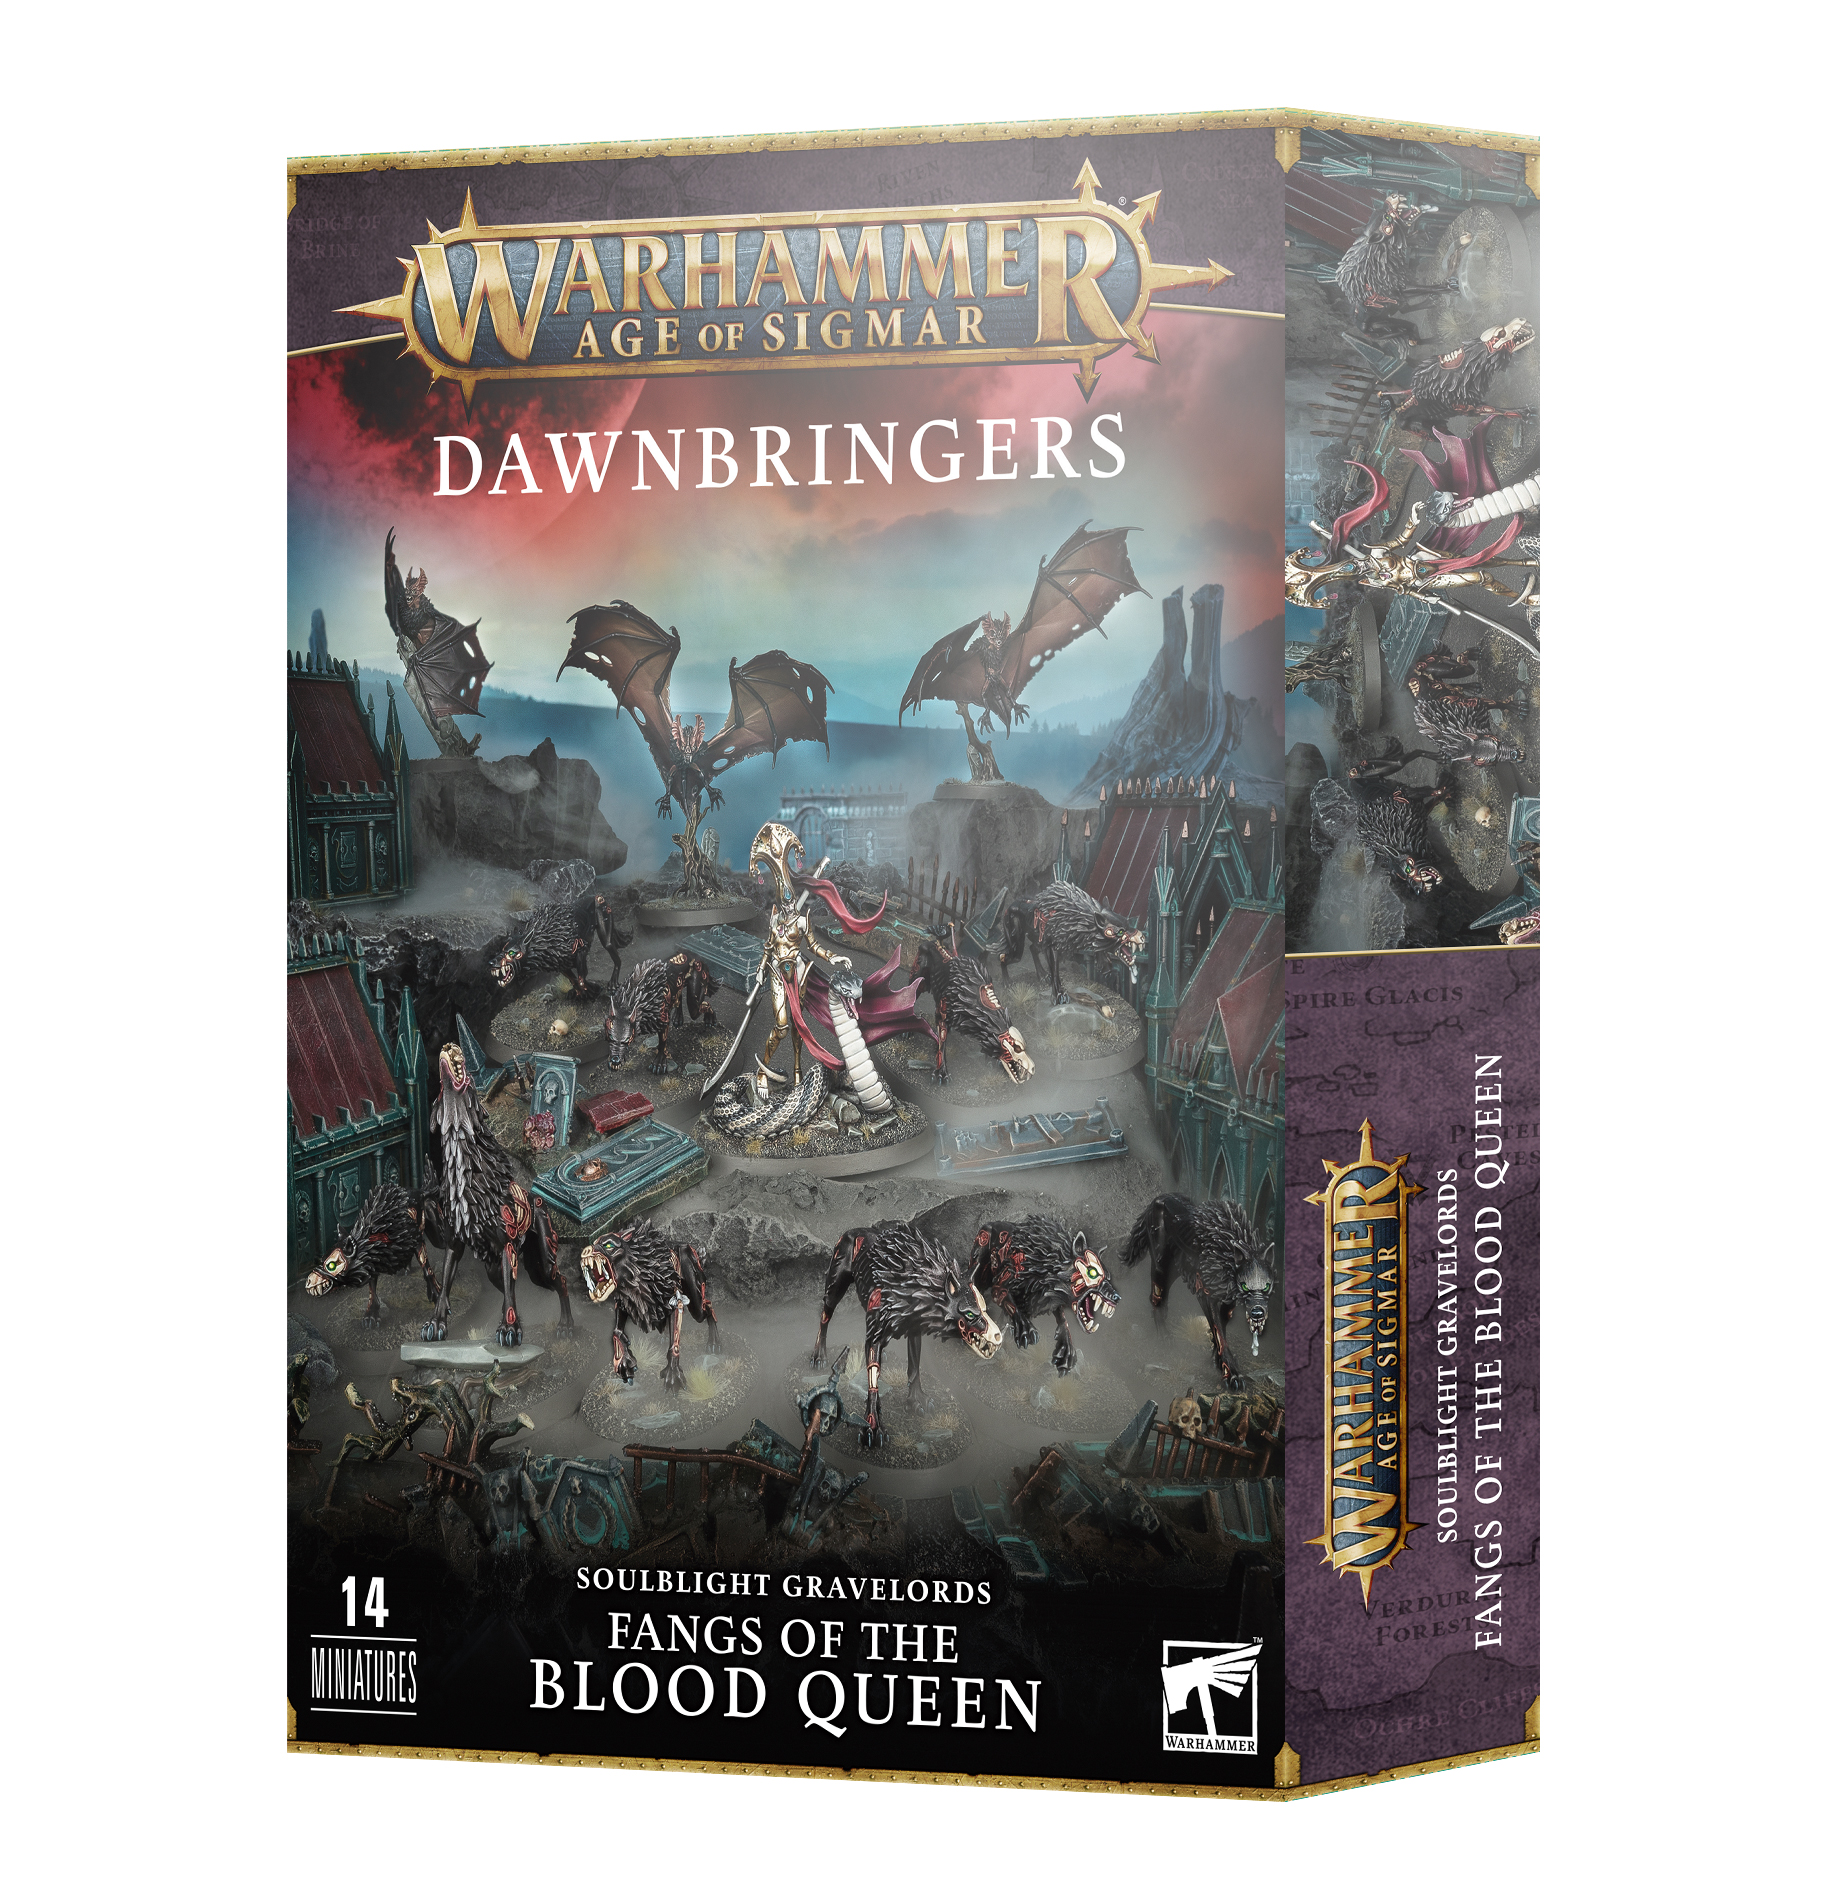 Warhammer Age Of Sigmar: Soulblight Gravelords: Dawnbringers: Fangs of the Blood Queen 